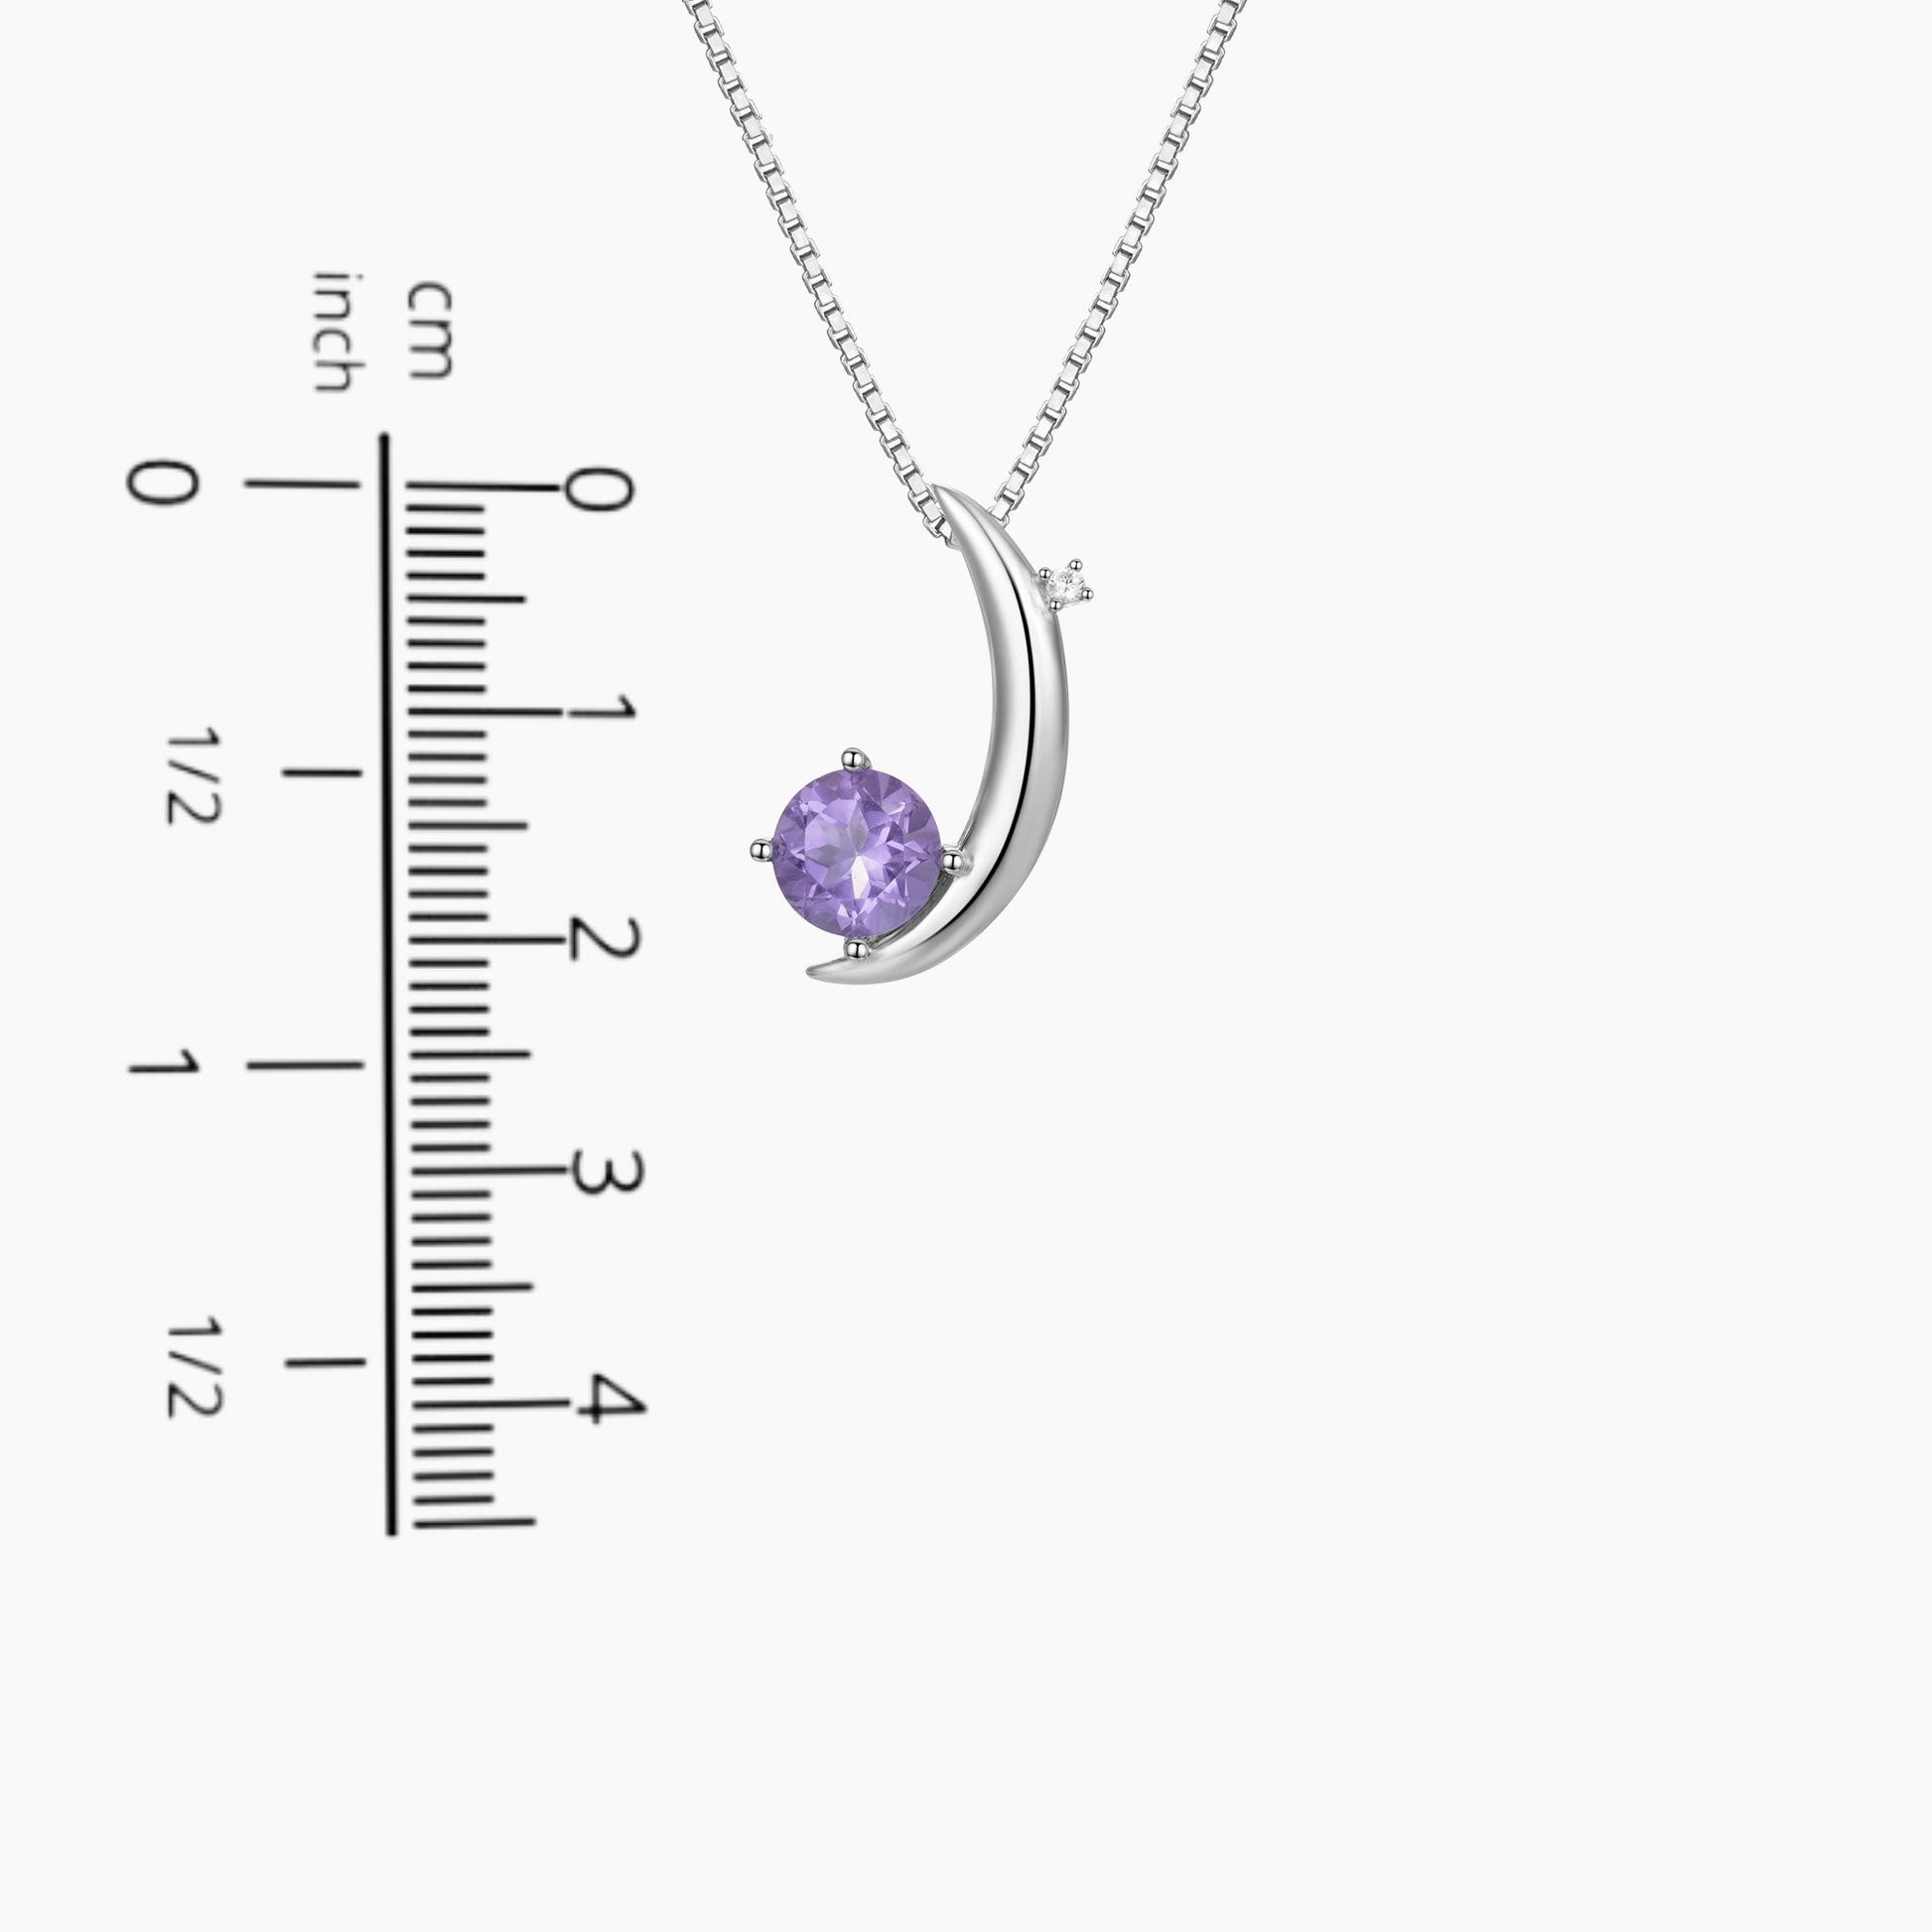 moon necklace in reference to a scale